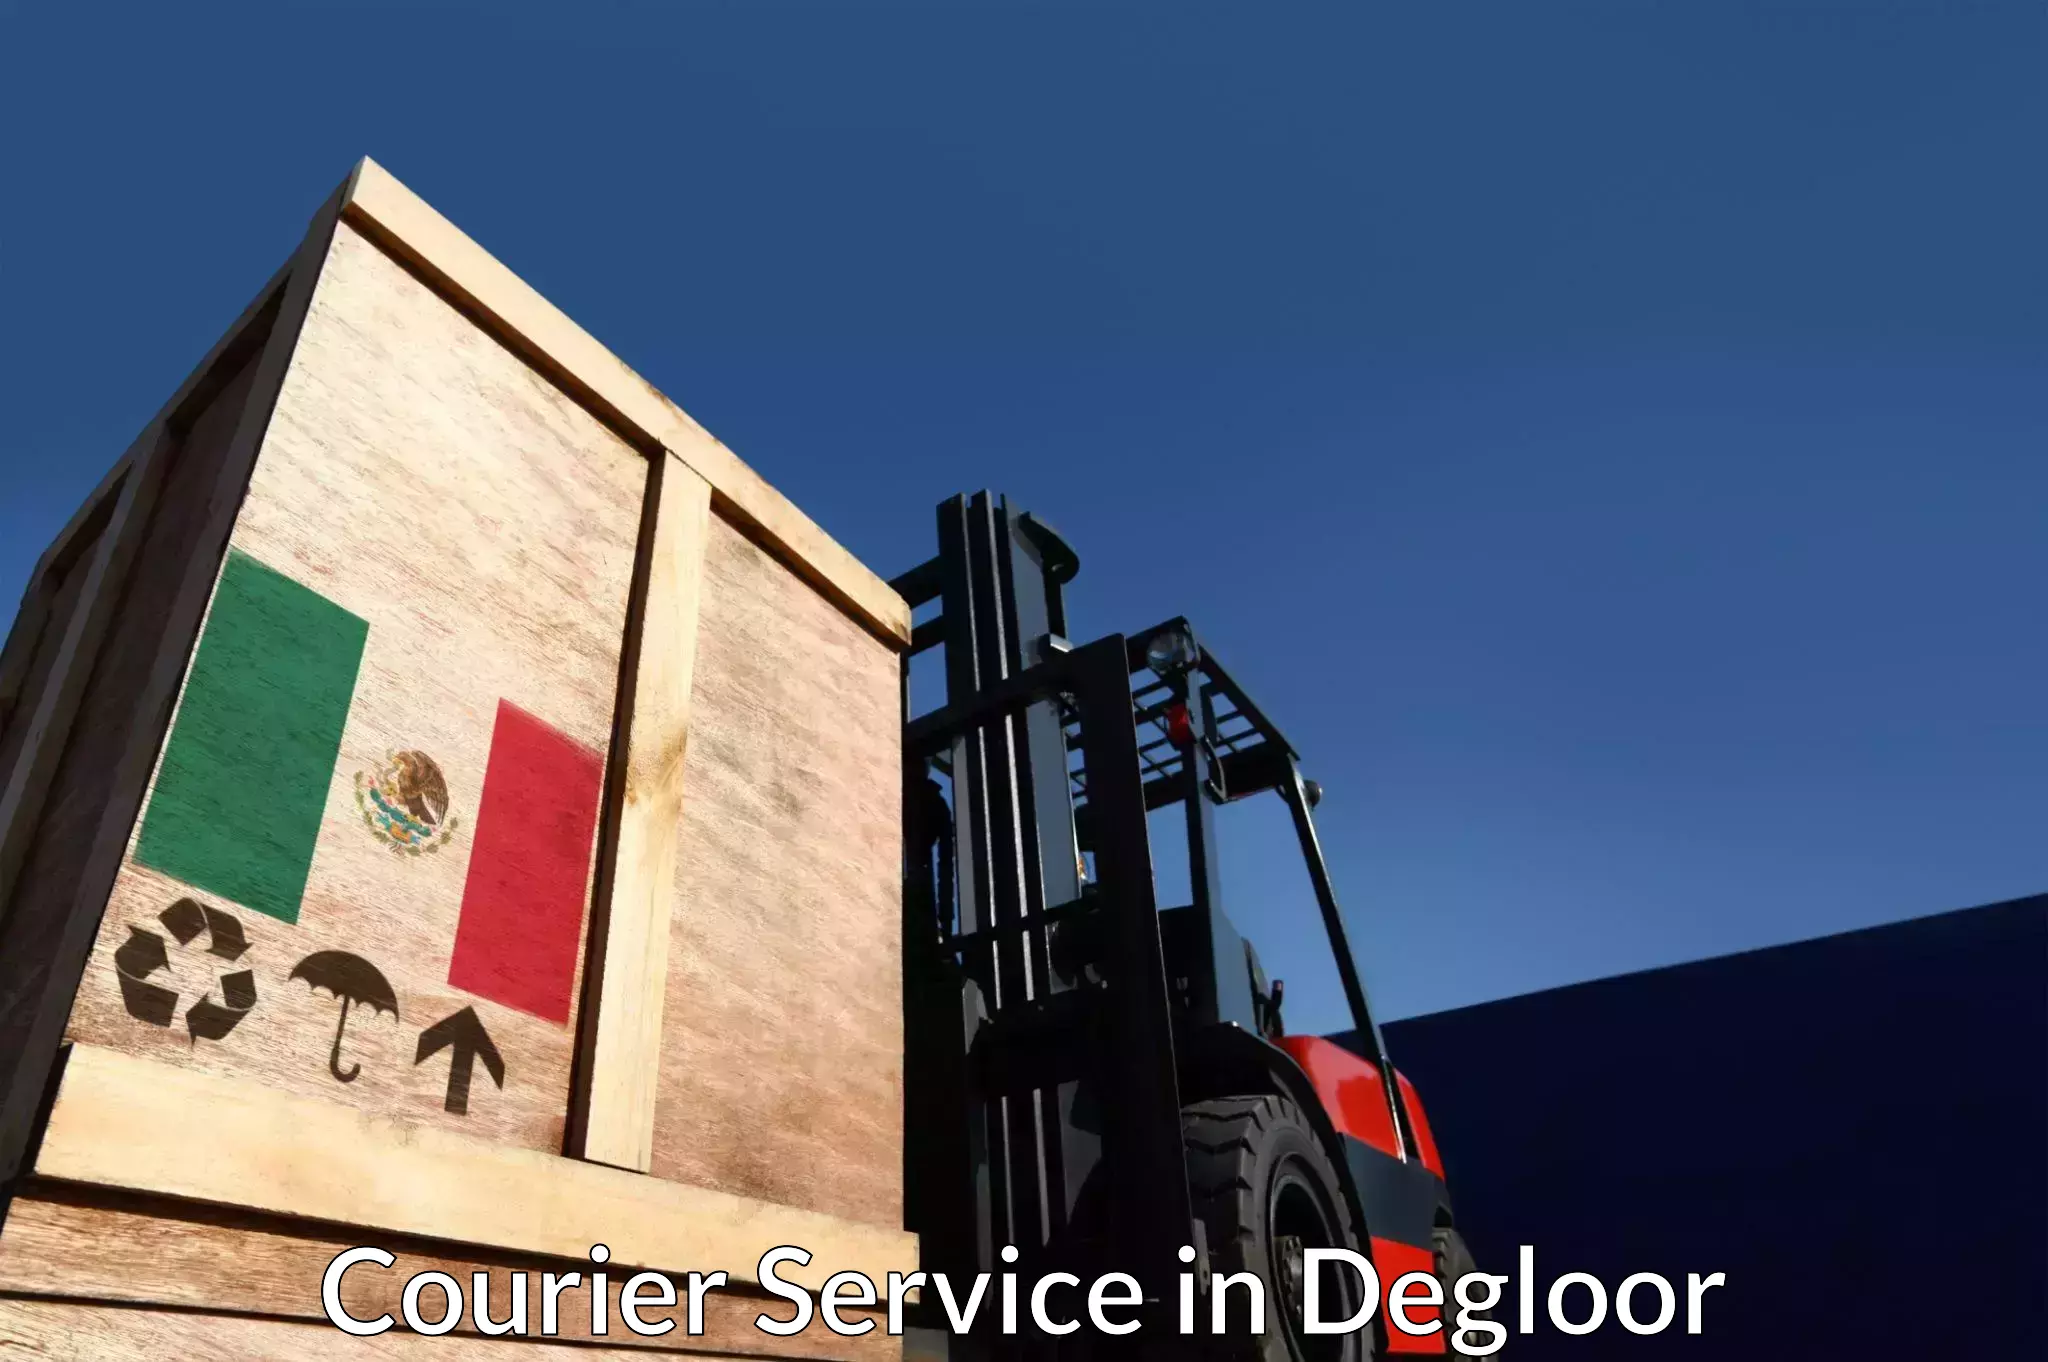 Expedited shipping methods in Degloor